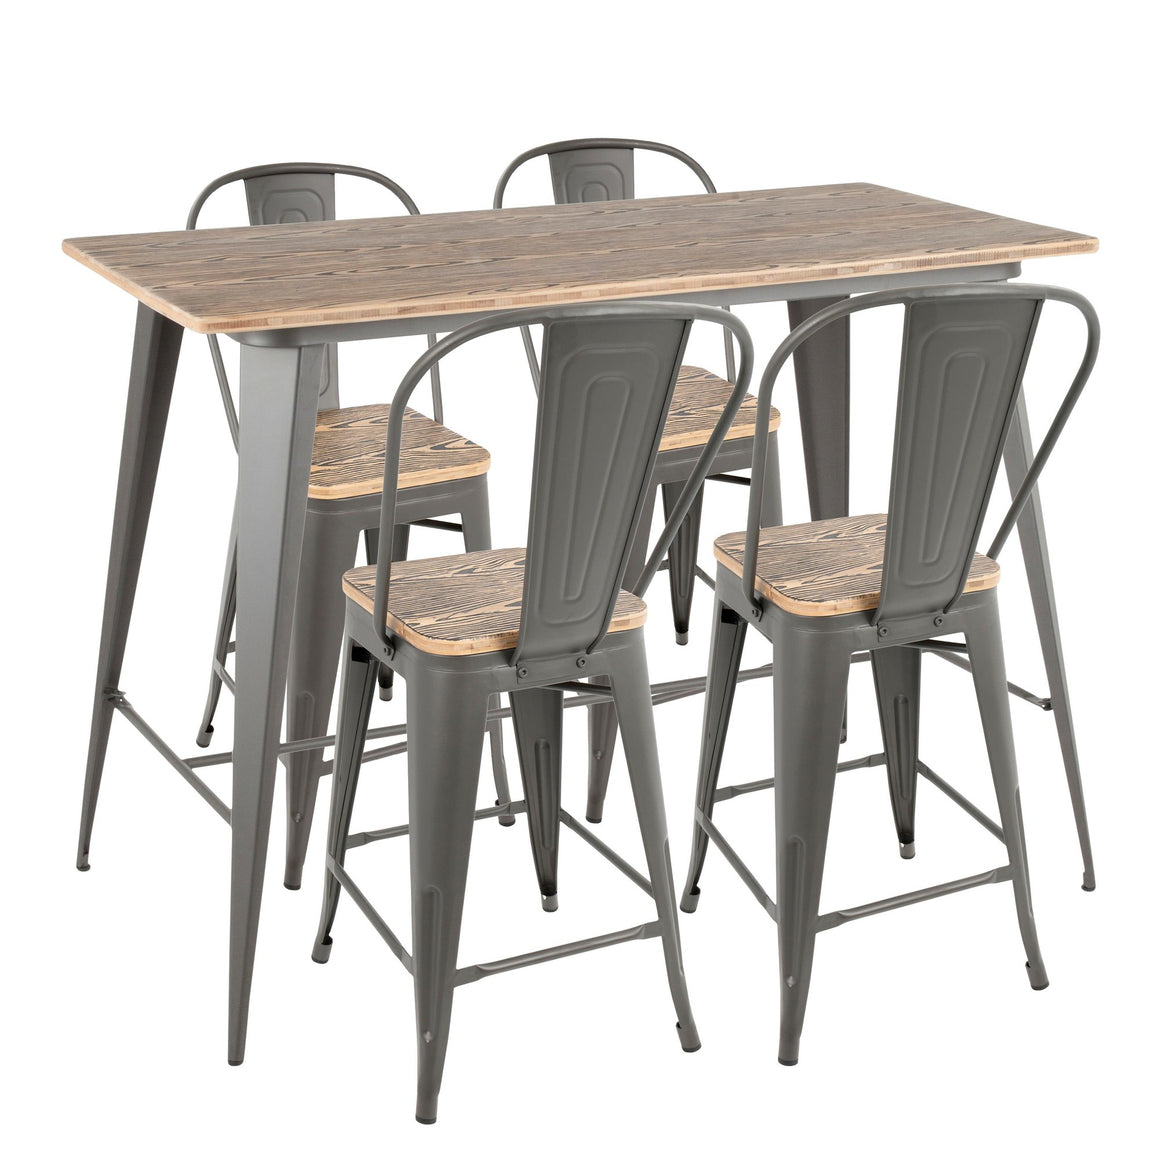 Oregon 5-Piece Industrial High Back Counter Set in Grey and Wood-Pressed Grain Bamboo by LumiSource